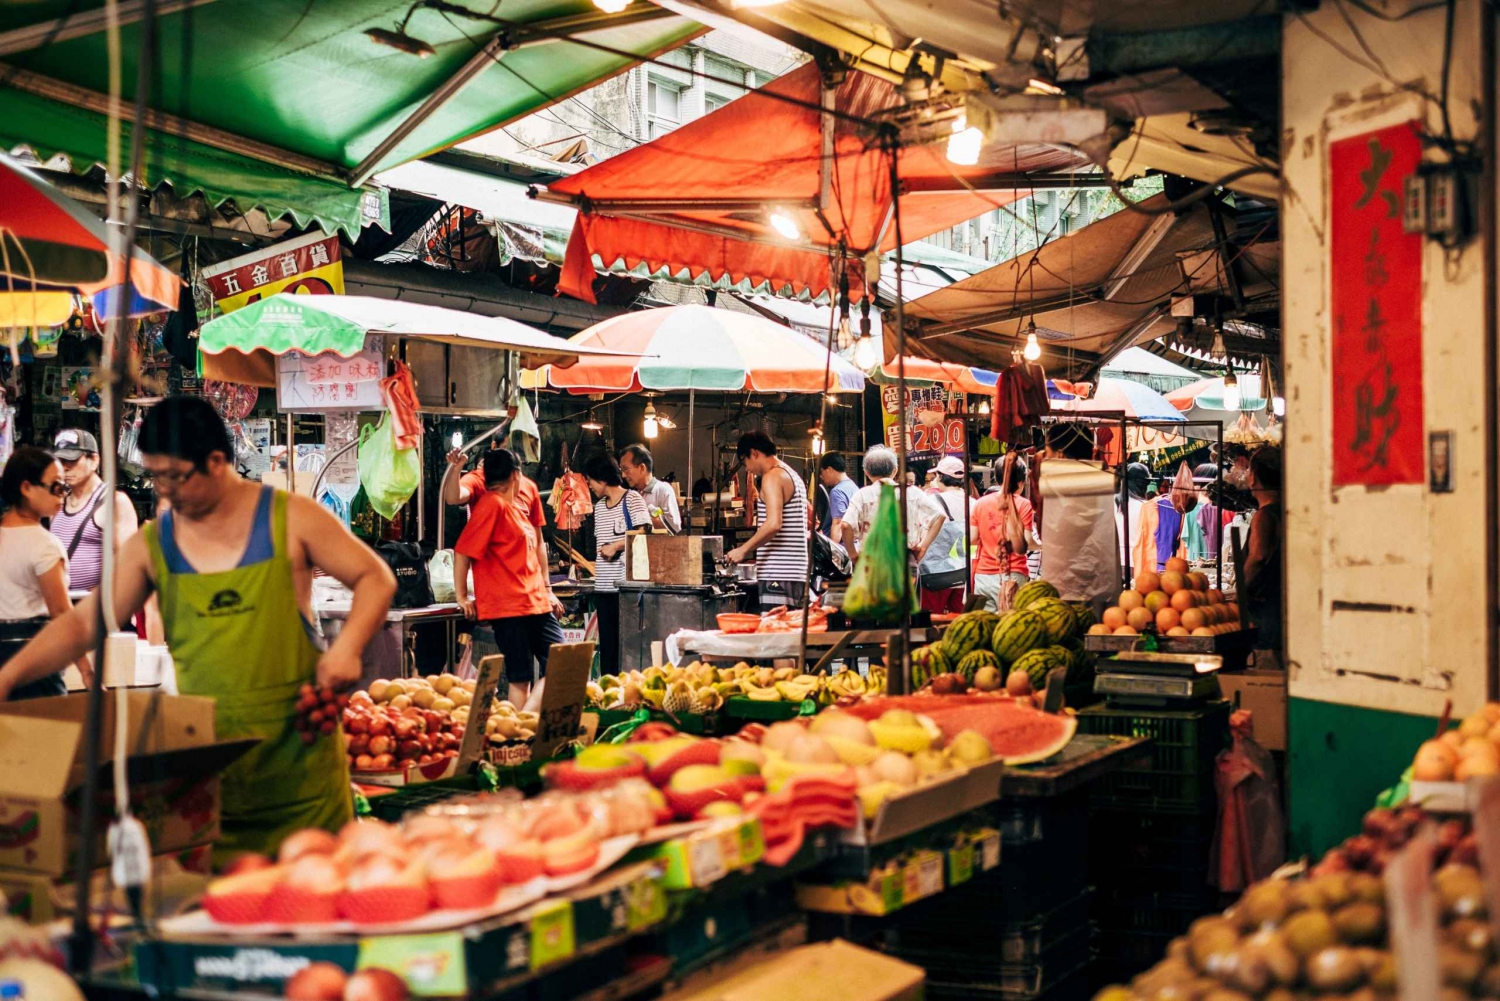 Iconic Food Tour: Local Street Food, Drinks & Sites